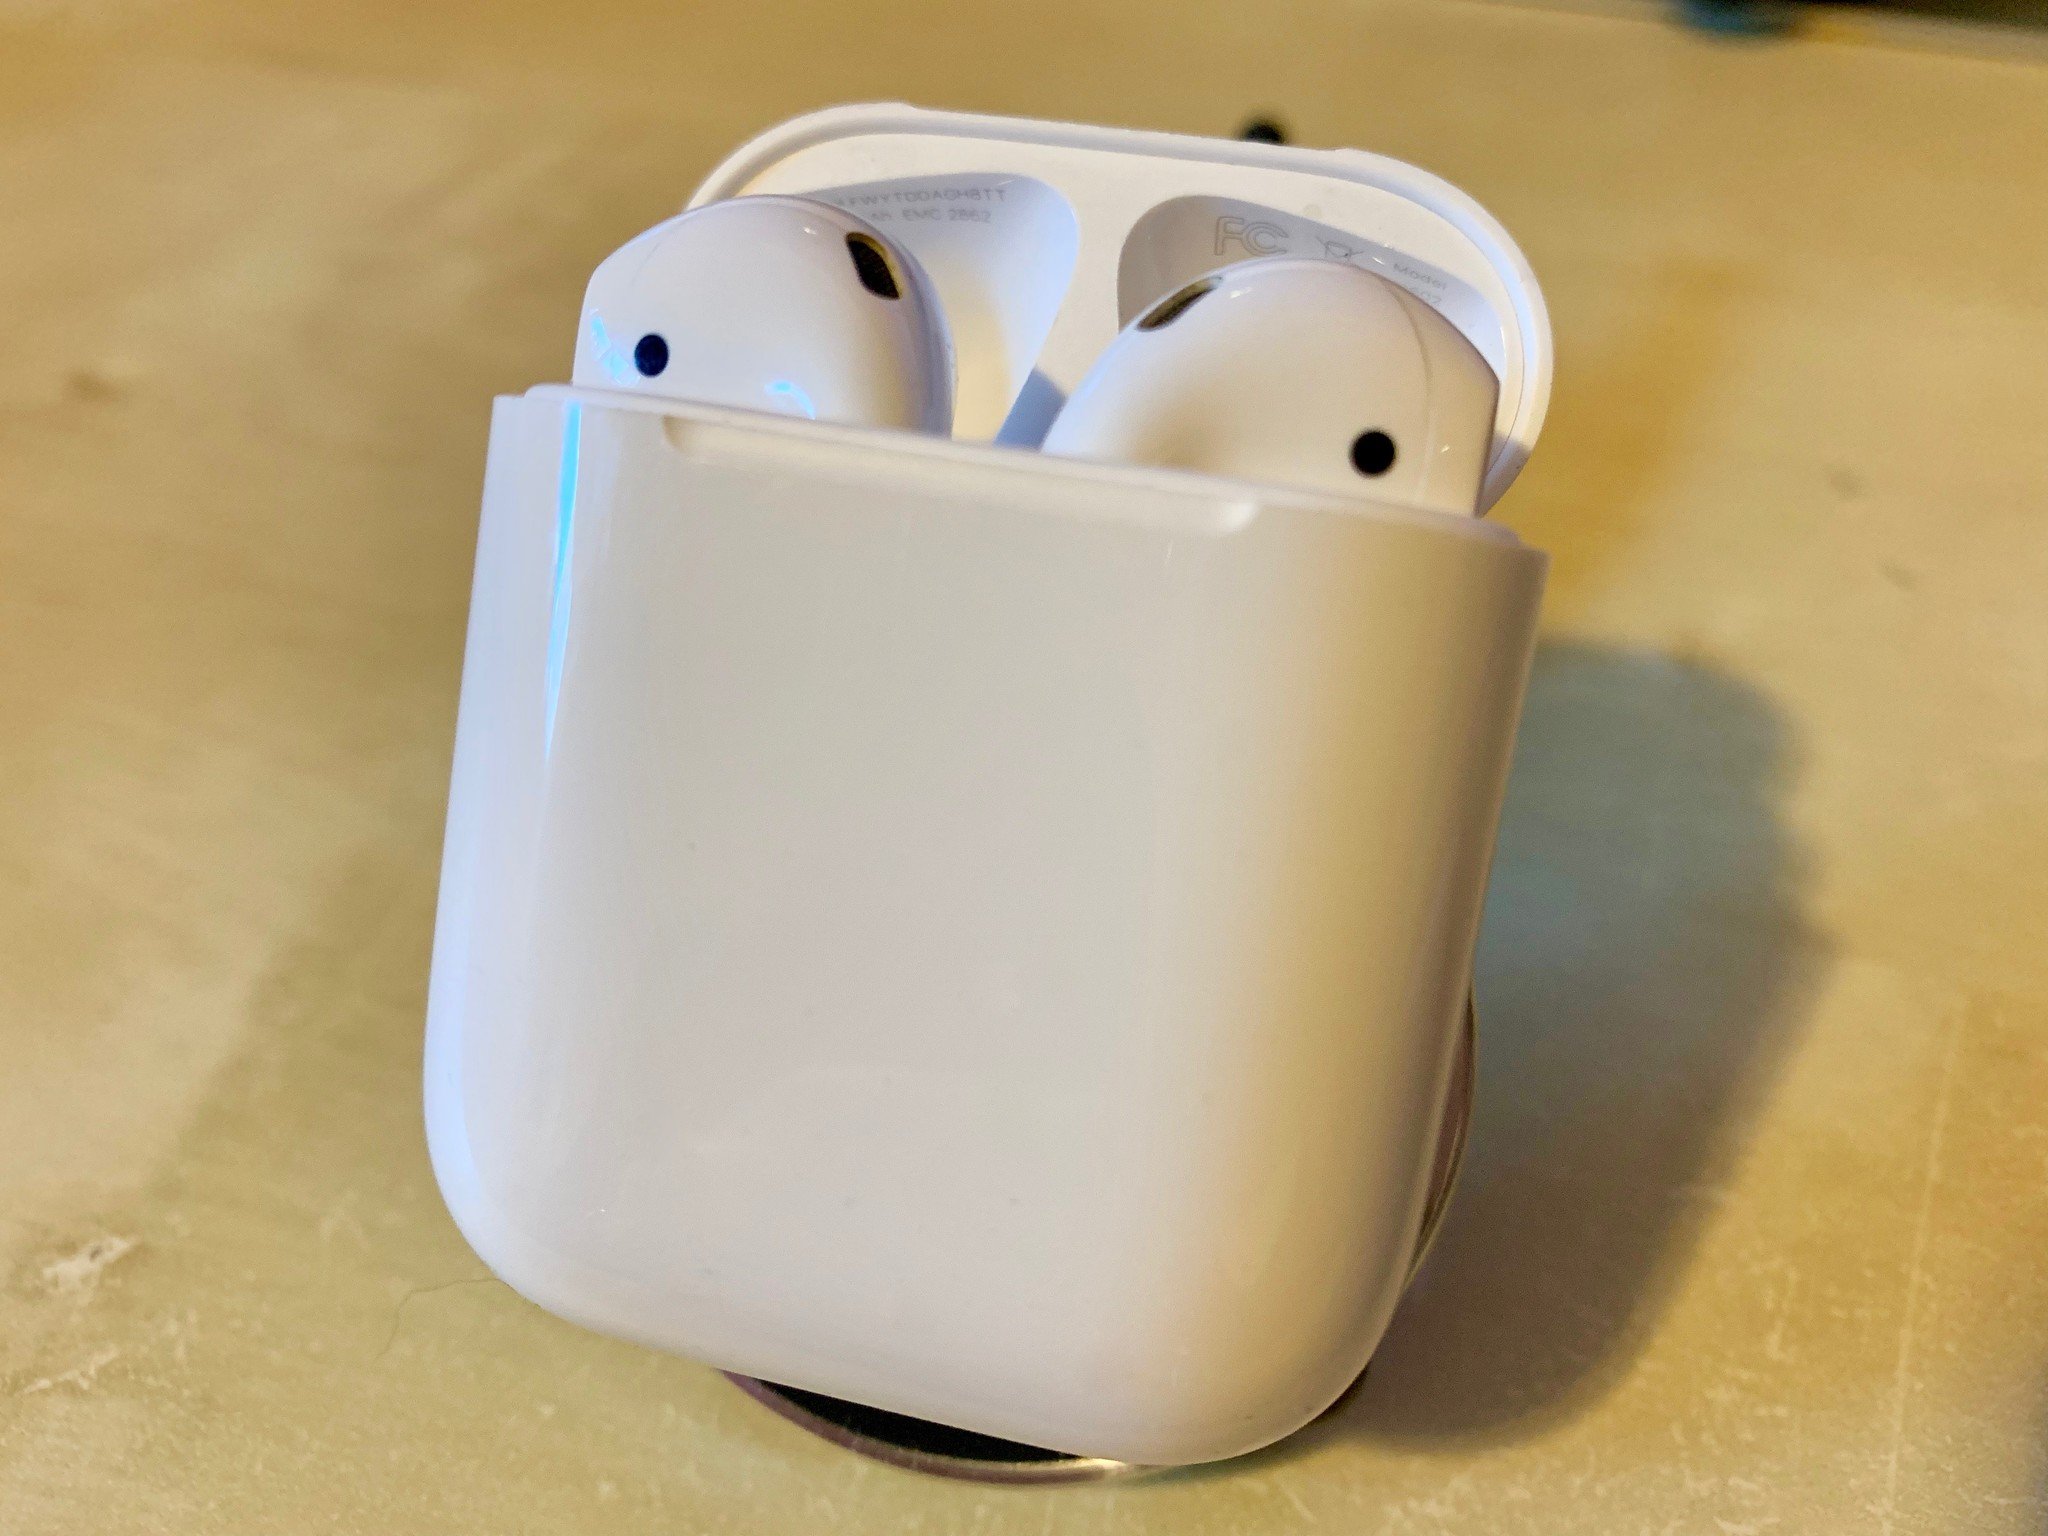 AirPods in their case